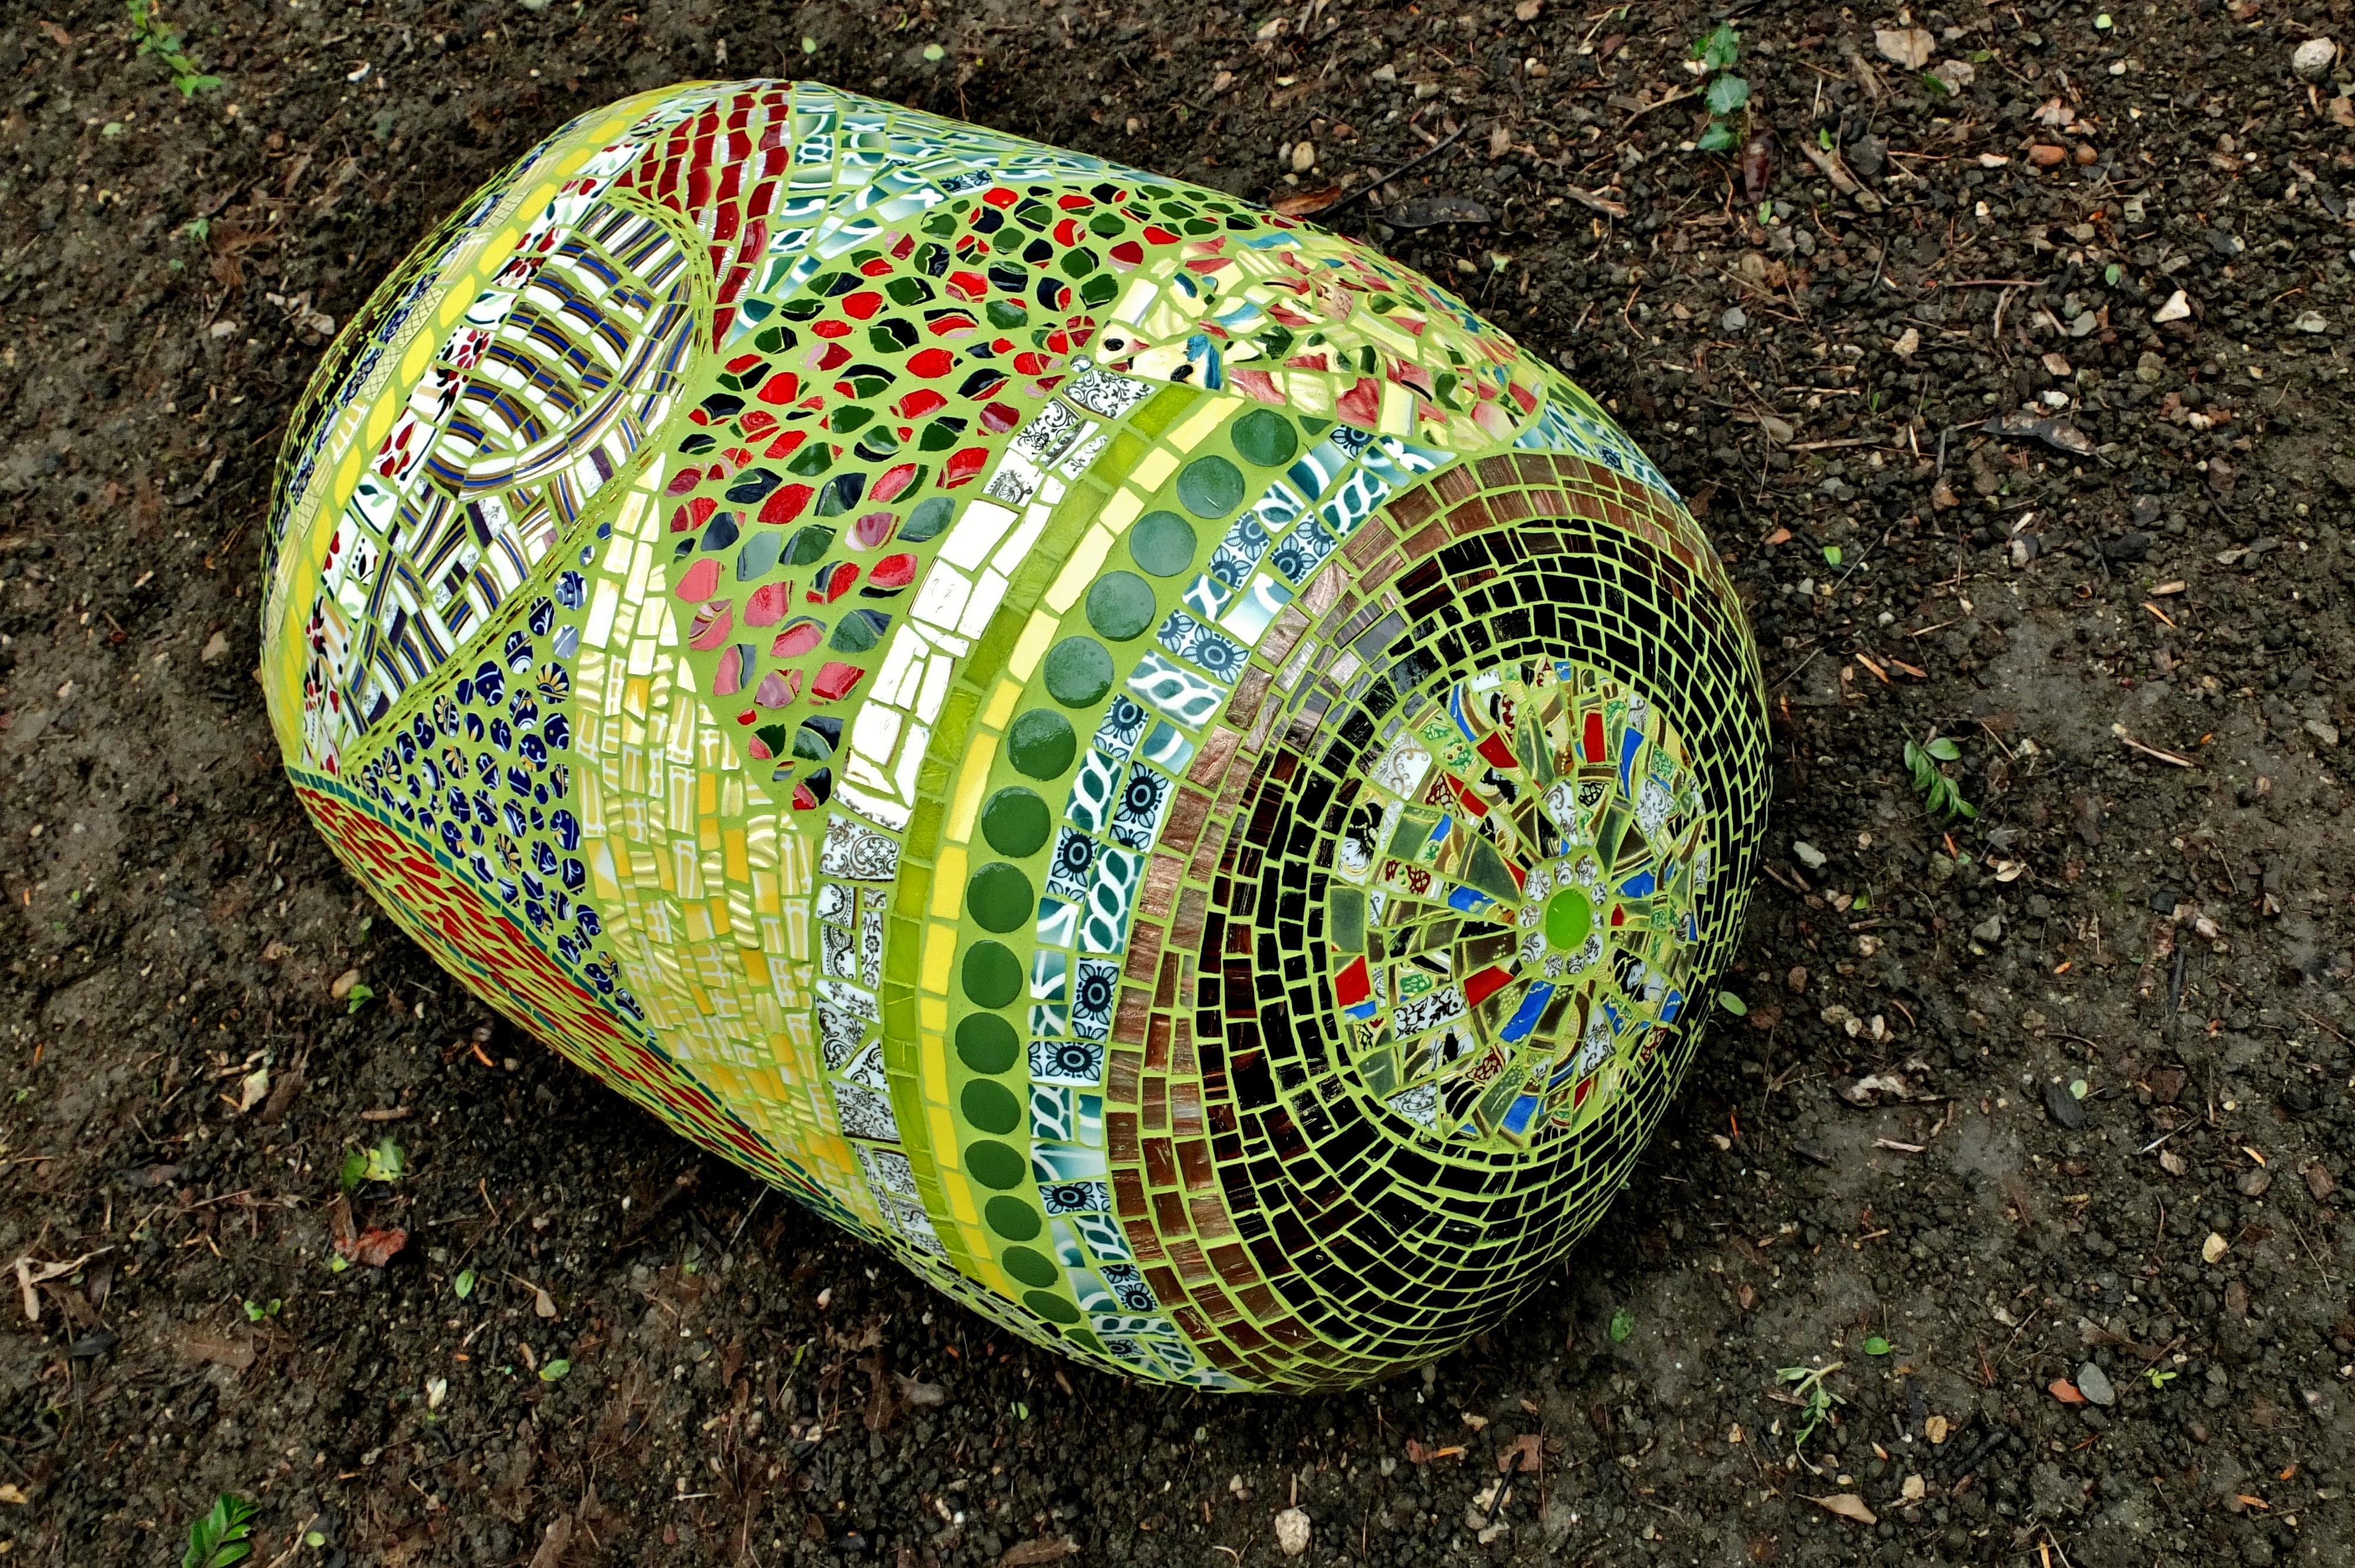 One of a kind mosaic ottoman pouf created using an original vintage small customized covered in fragments of ceramic, porcelain dishes, mirrors, glass, etc. All these different materials are gather together and handcut one by one. Then the